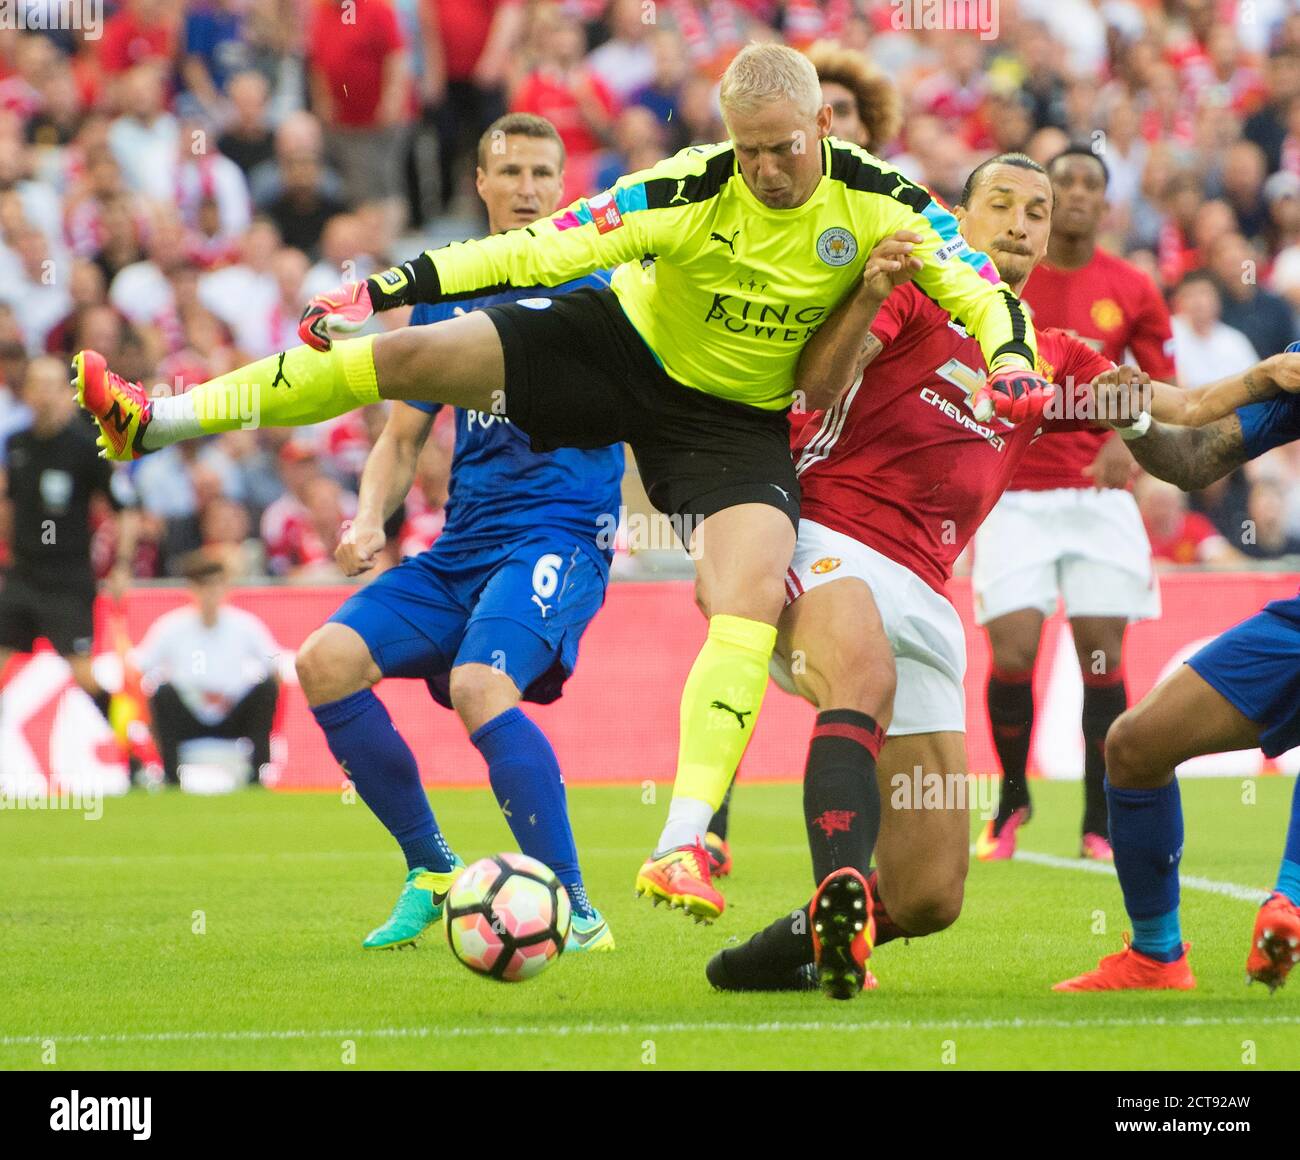 ZLATAN IBRAHIMOVIC CHALLENGES FOR HE BALL AS KASPER SCHMEICHEL CHARGES OUT TO CLEAR  LEICESTER CITY v MANCHESTER UTD THE FA COMMUNITY SHIELD - WEMBLEY Stock Photo